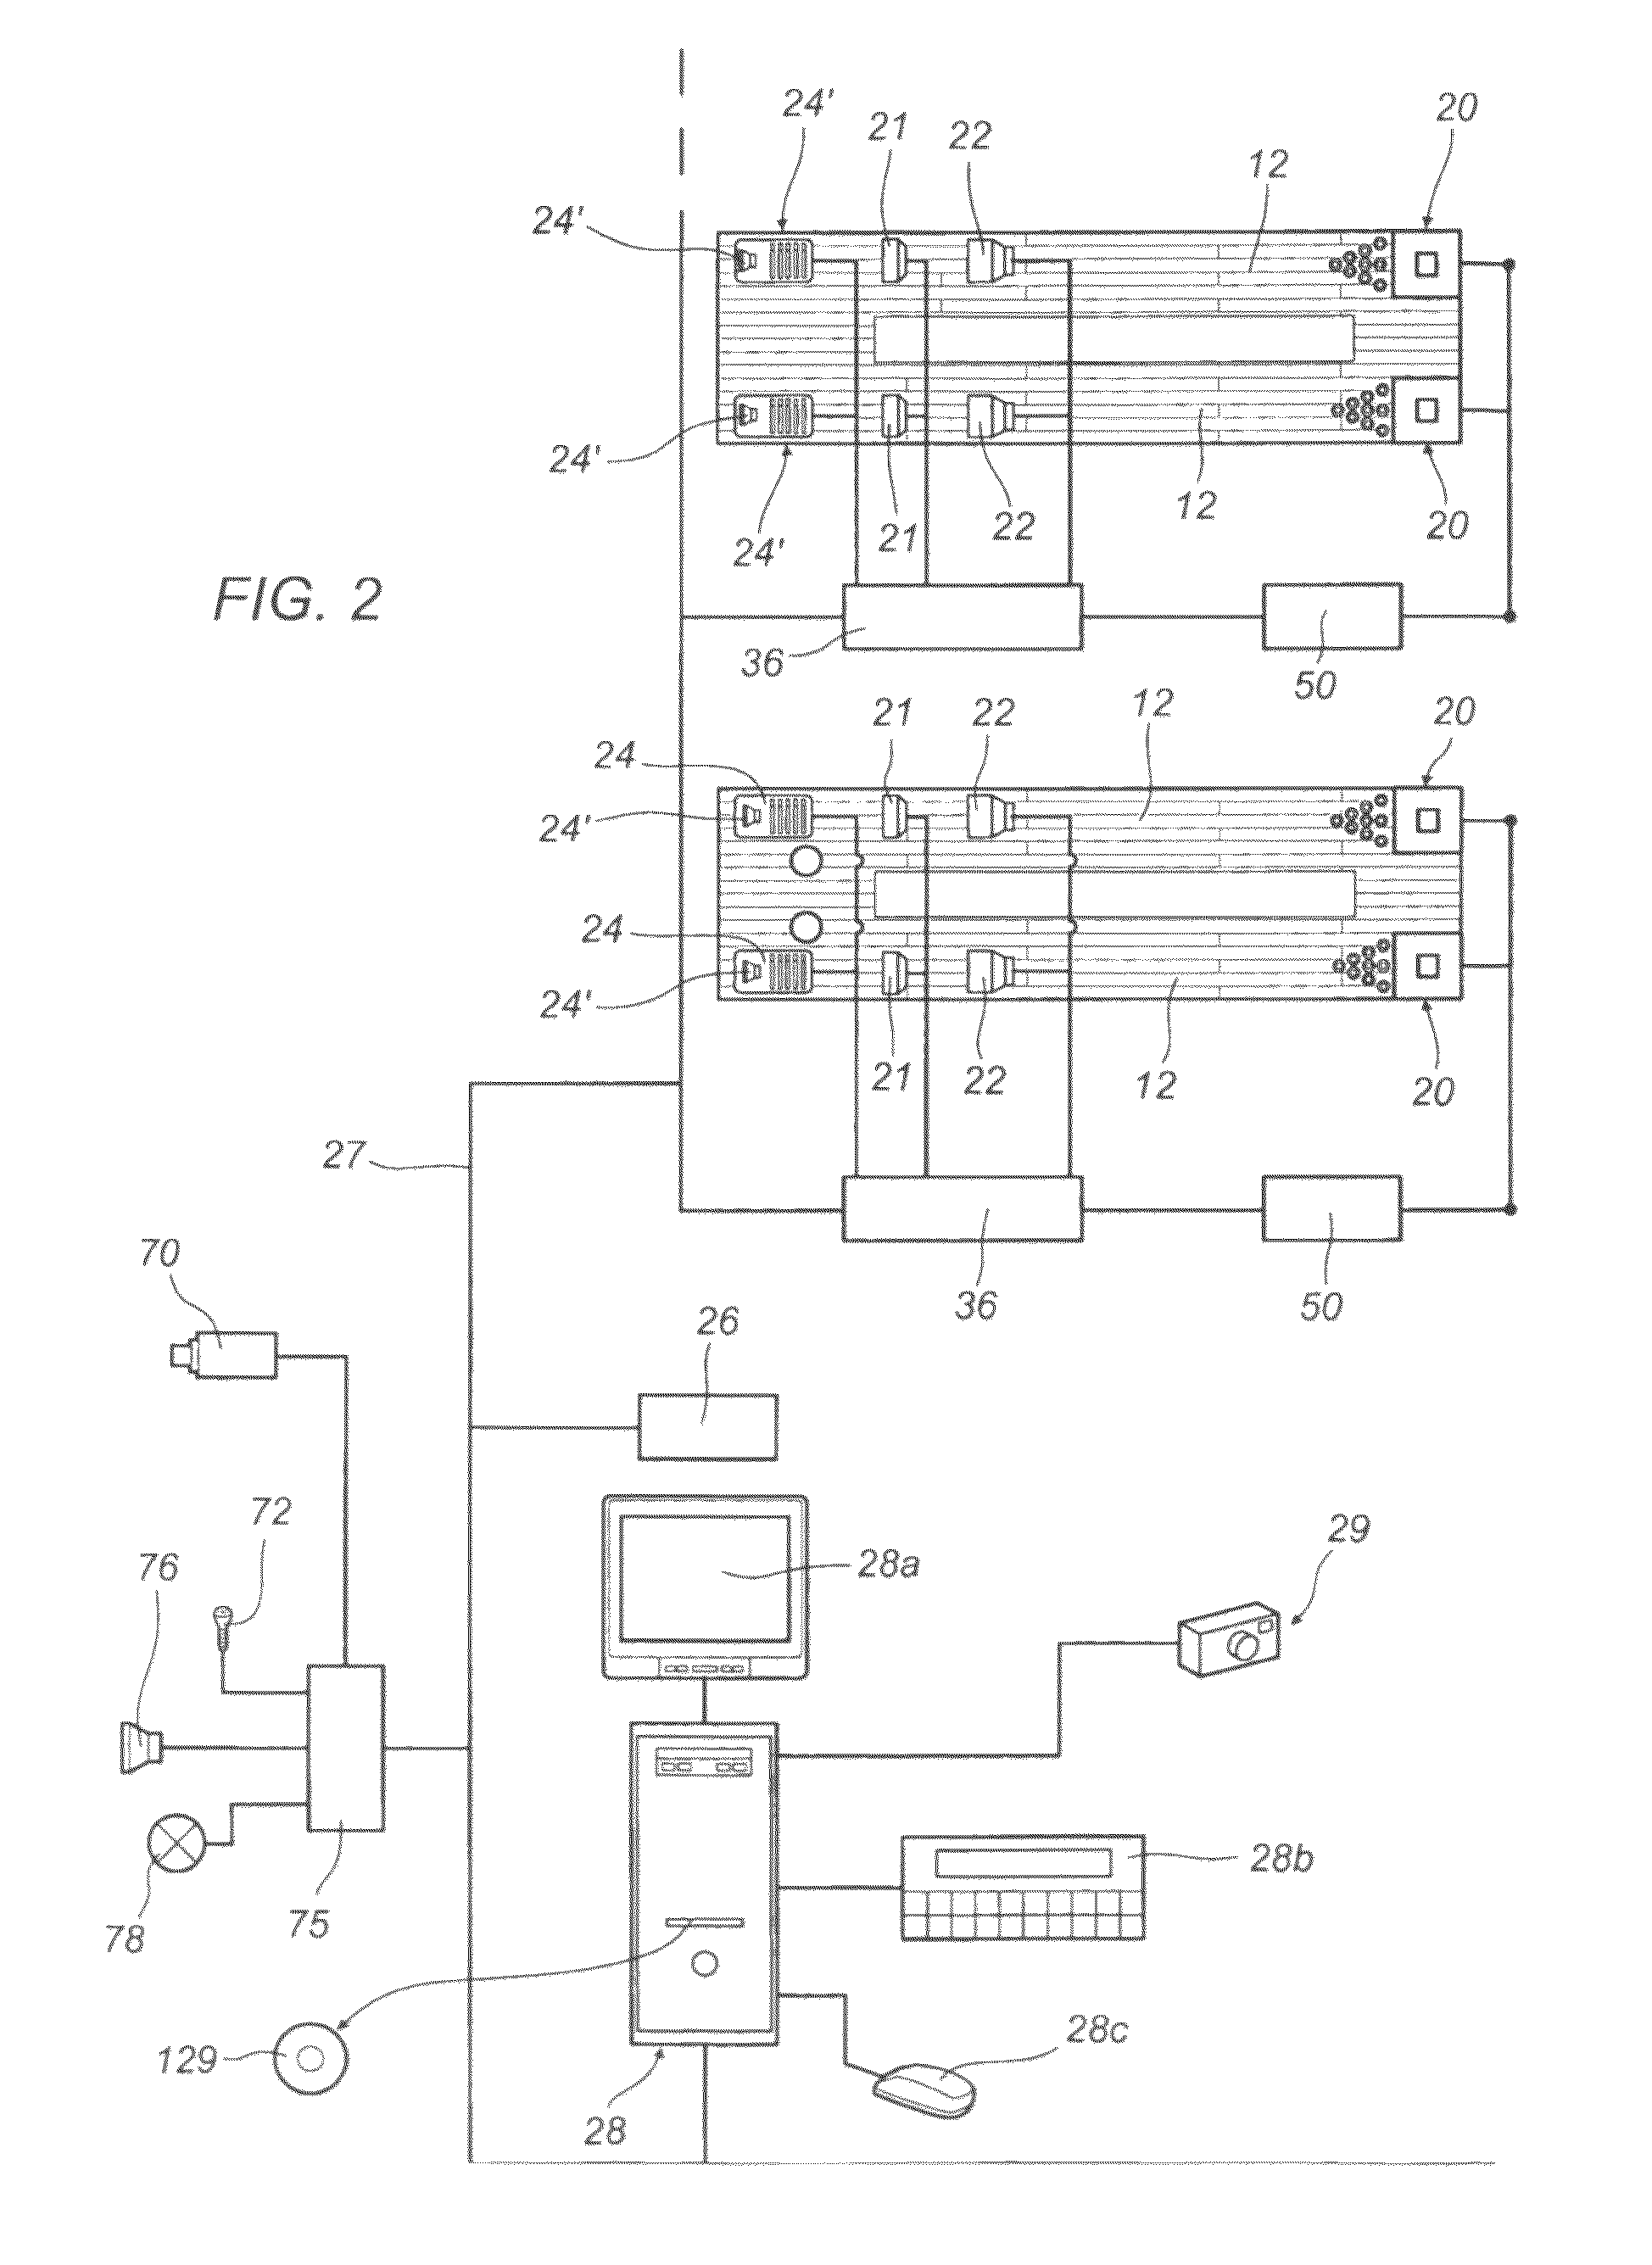 Process and apparatus for managing signals at a bowling alley or the like